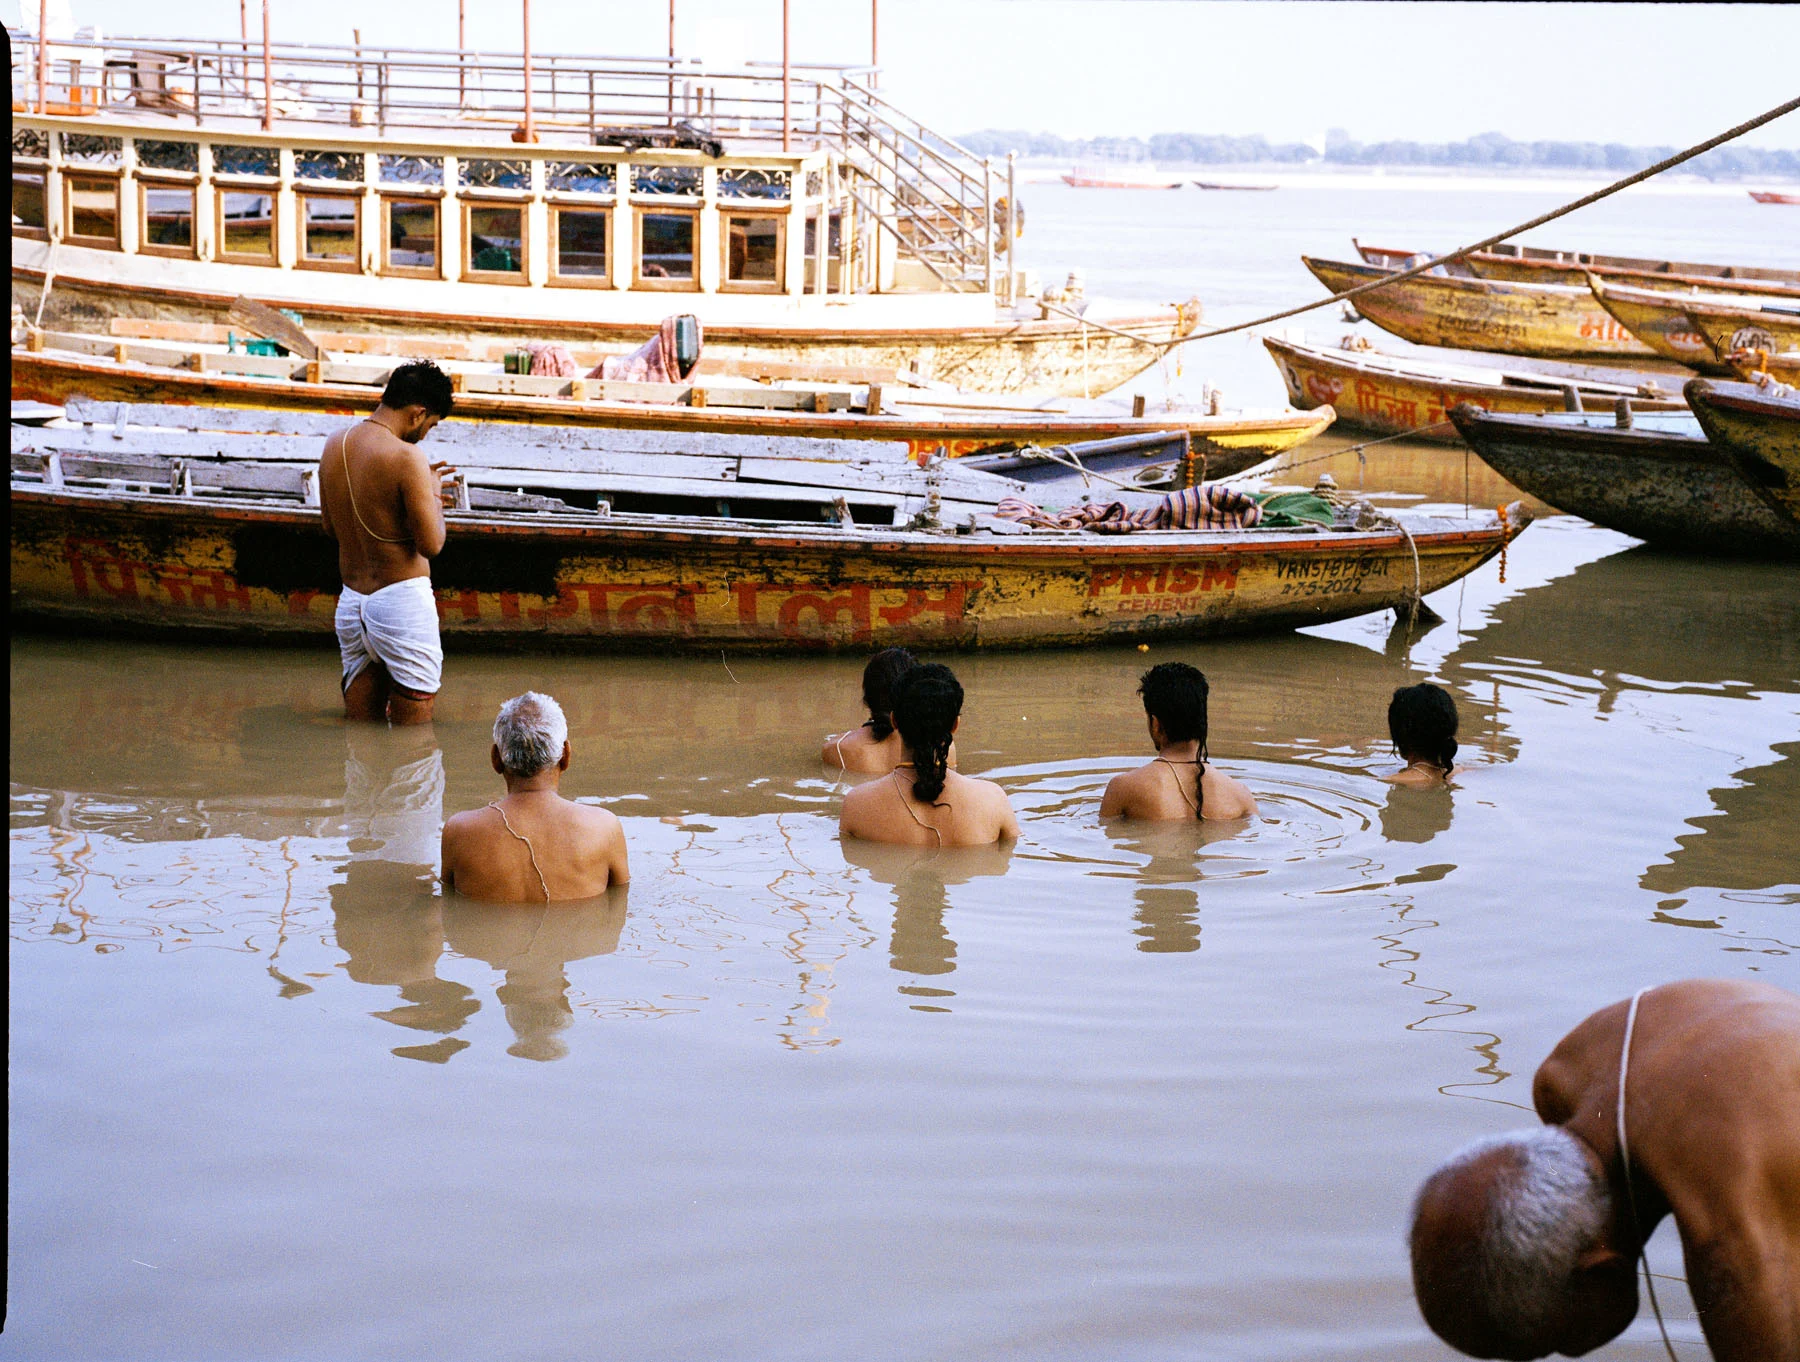 A photograph of people praying while submerged in the river Ganges, in Varanasi.